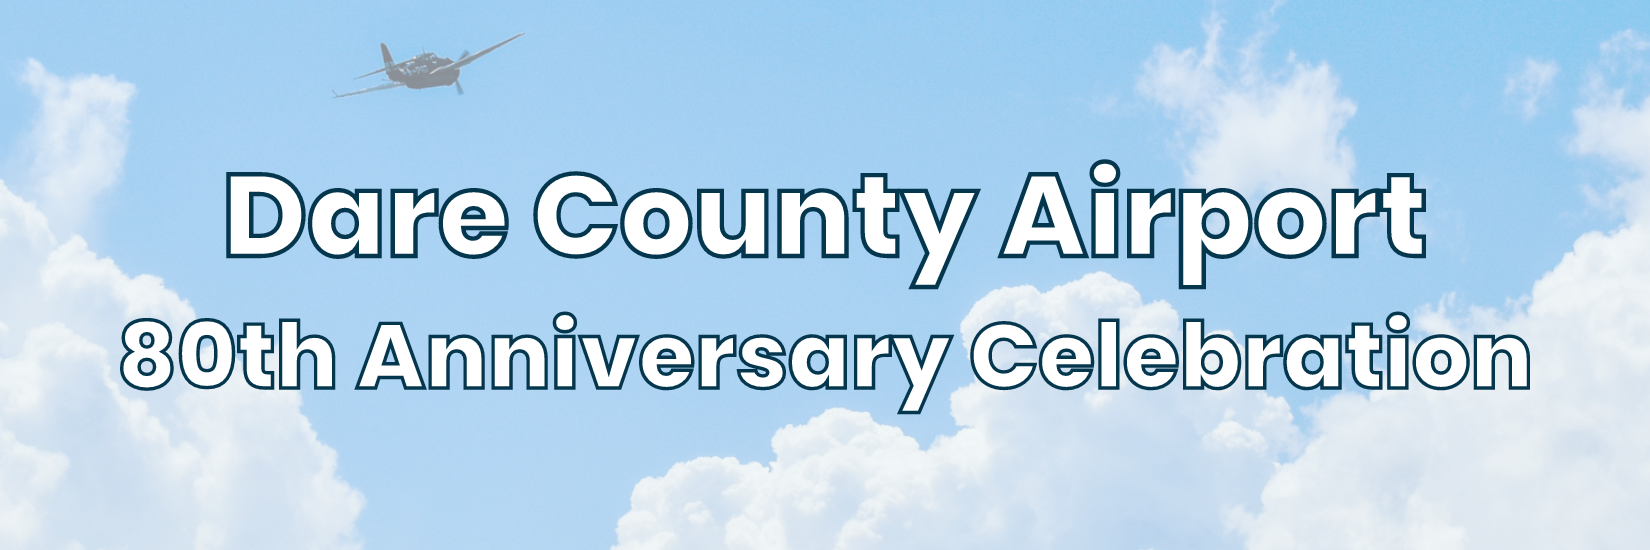 Image of a plane flying high in the sky. Text overlay reads, "Dare County Airport Airport 80th Anniversary Celebration"